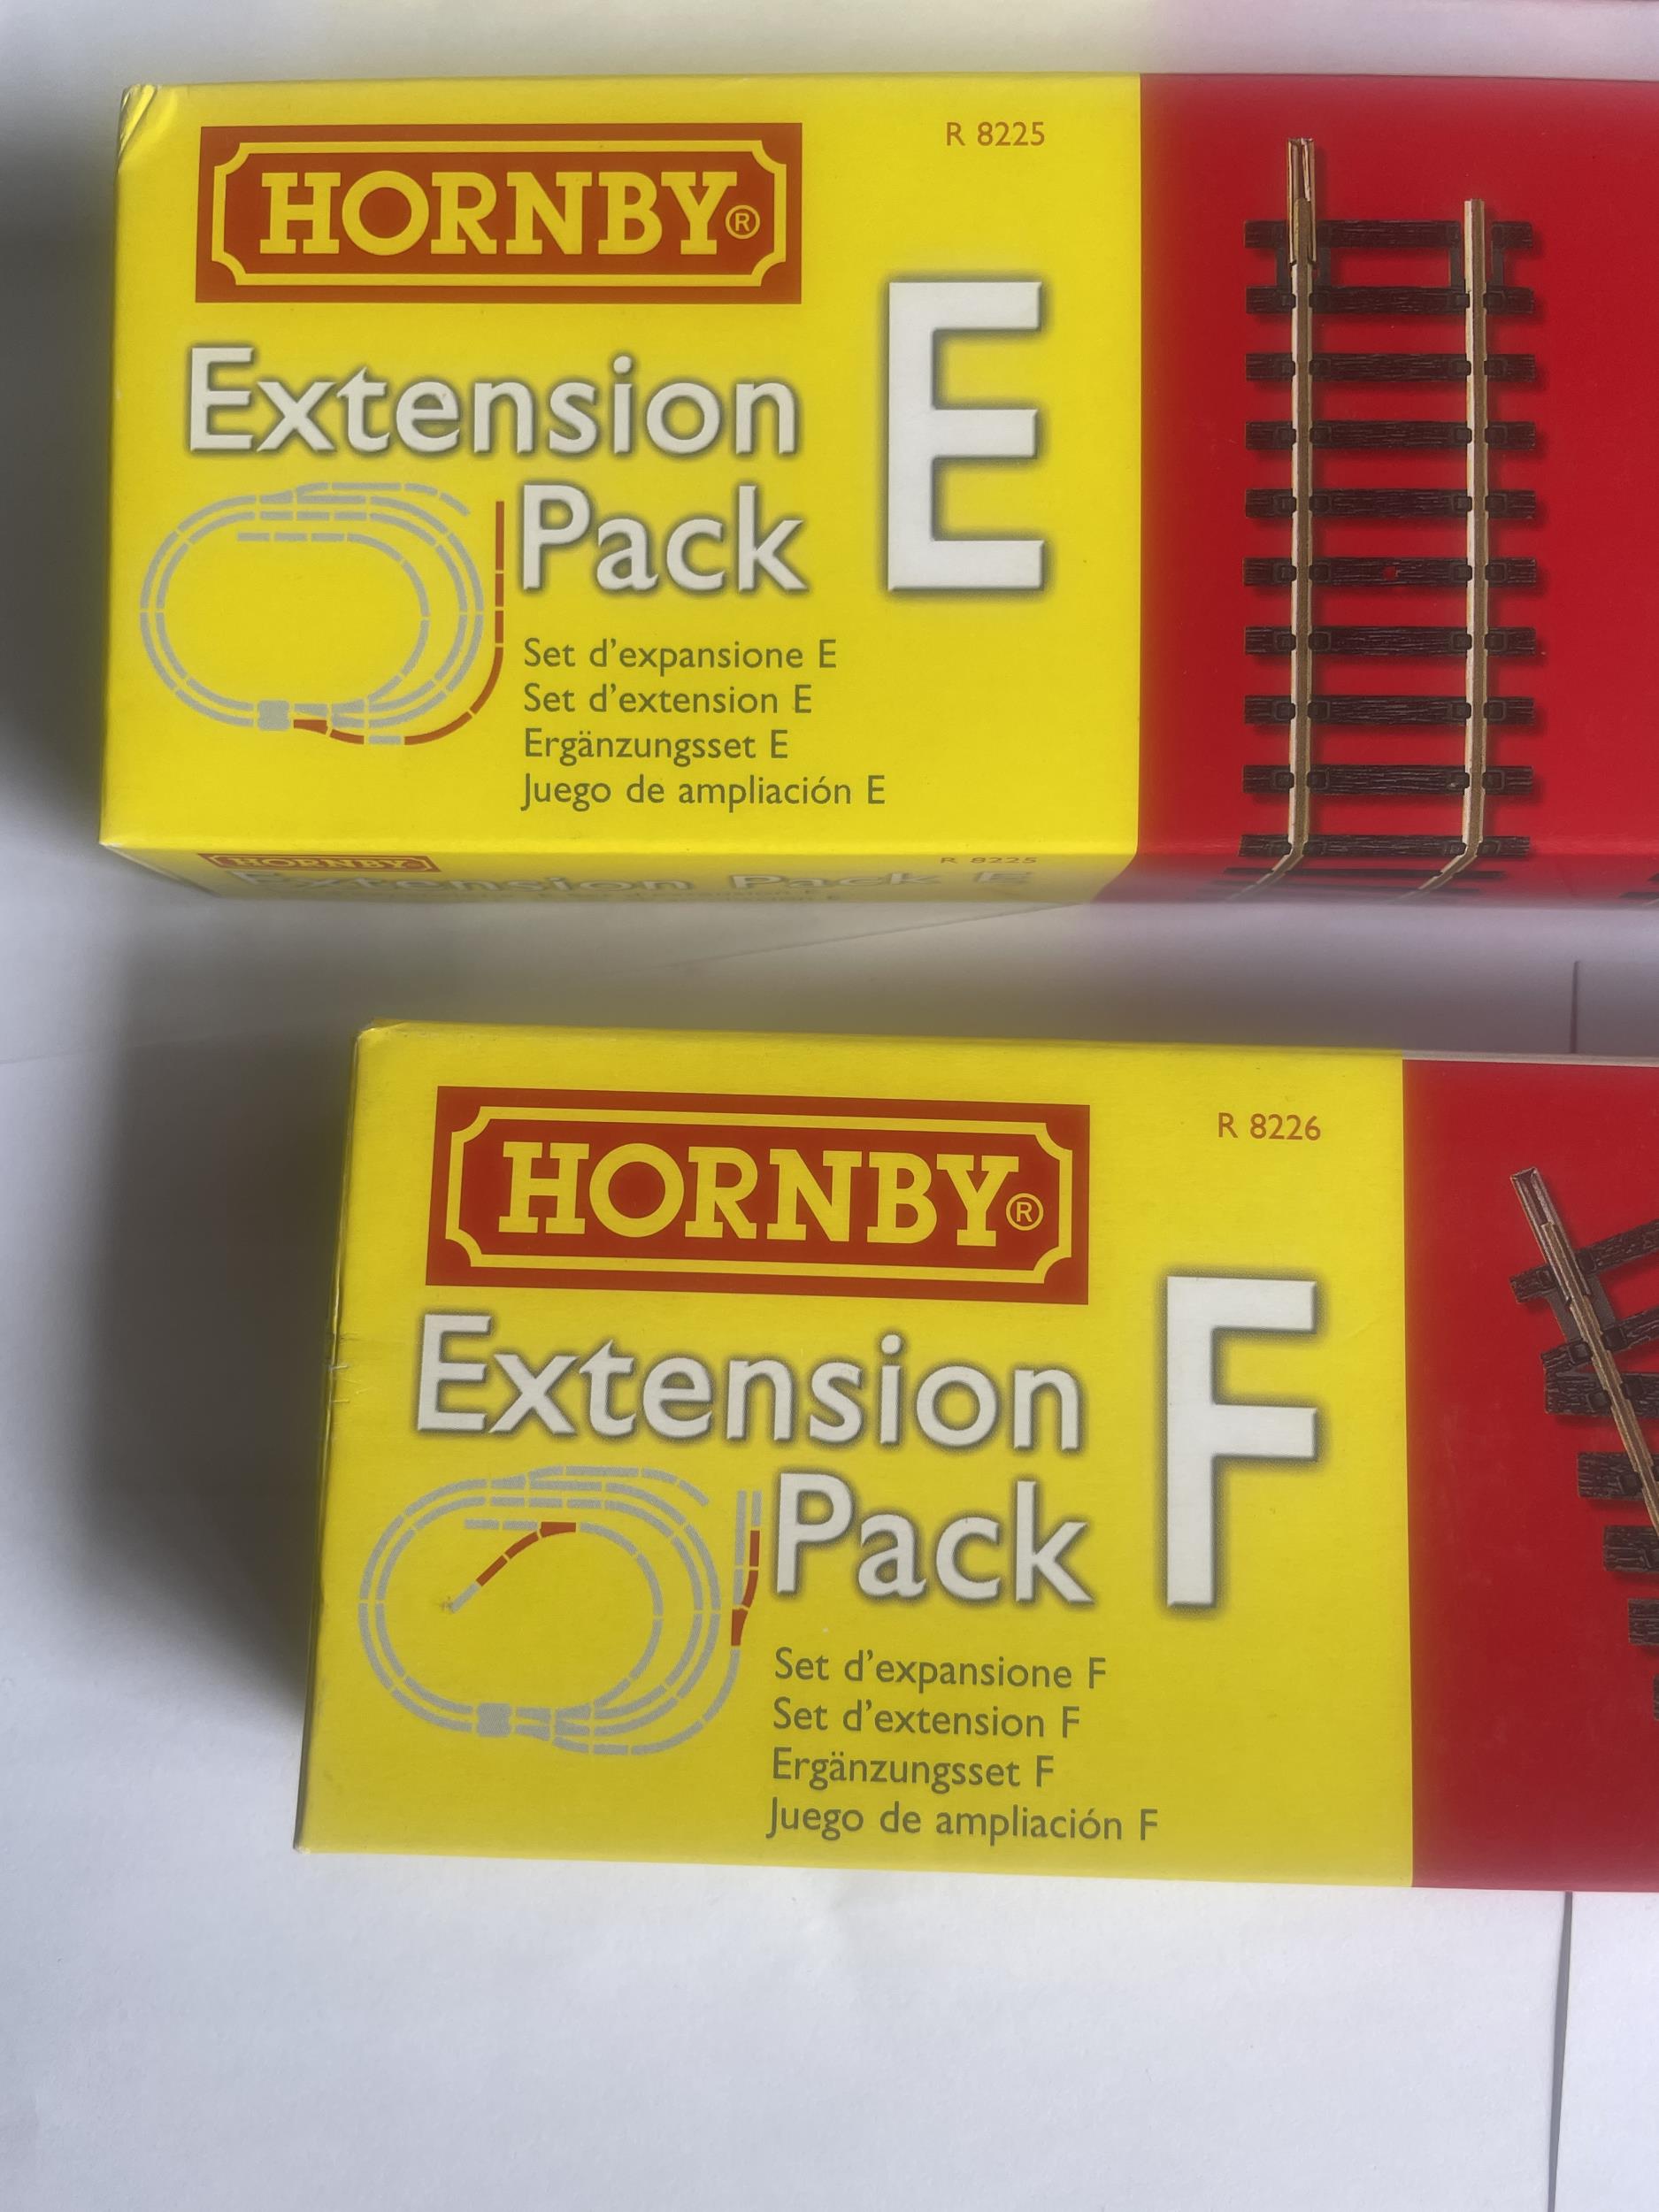 FIVE BOXED HORNBY 00 GAUGE TRACK EXTENSION PACKS TO INCLUDE A,B,C,E AND F - Image 3 of 3